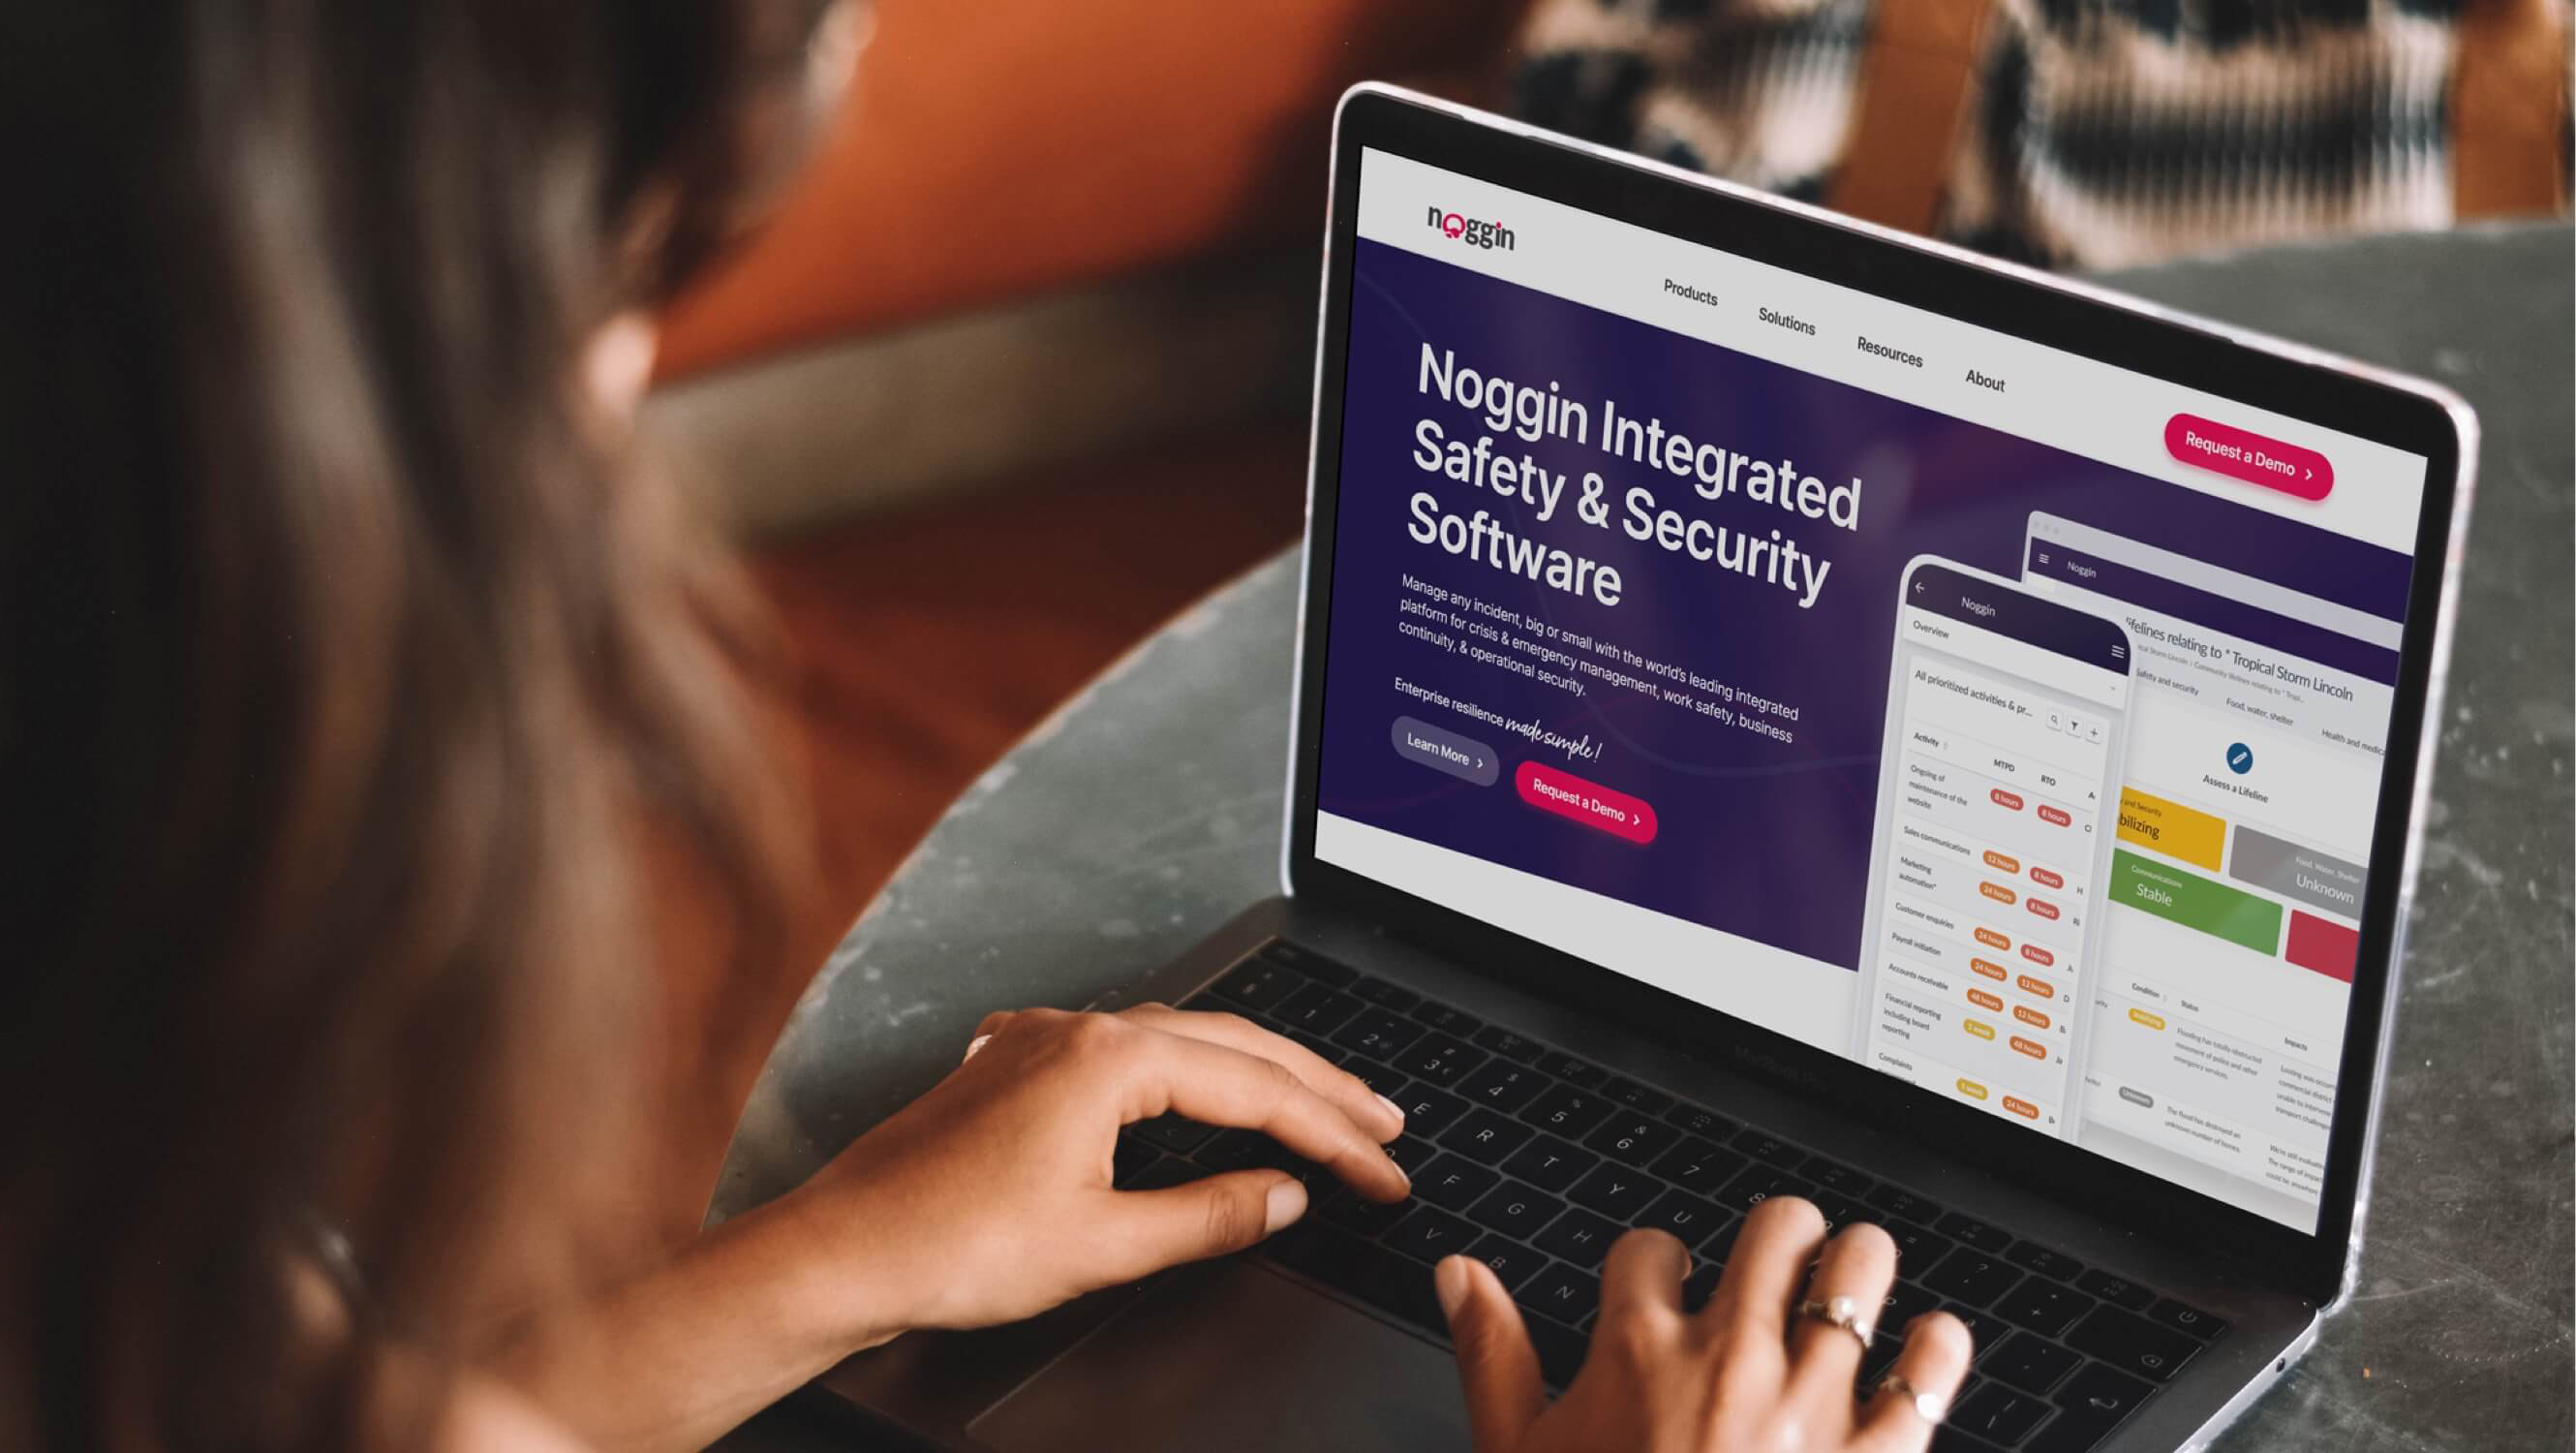 Noggin Integrated Safety & Security Software